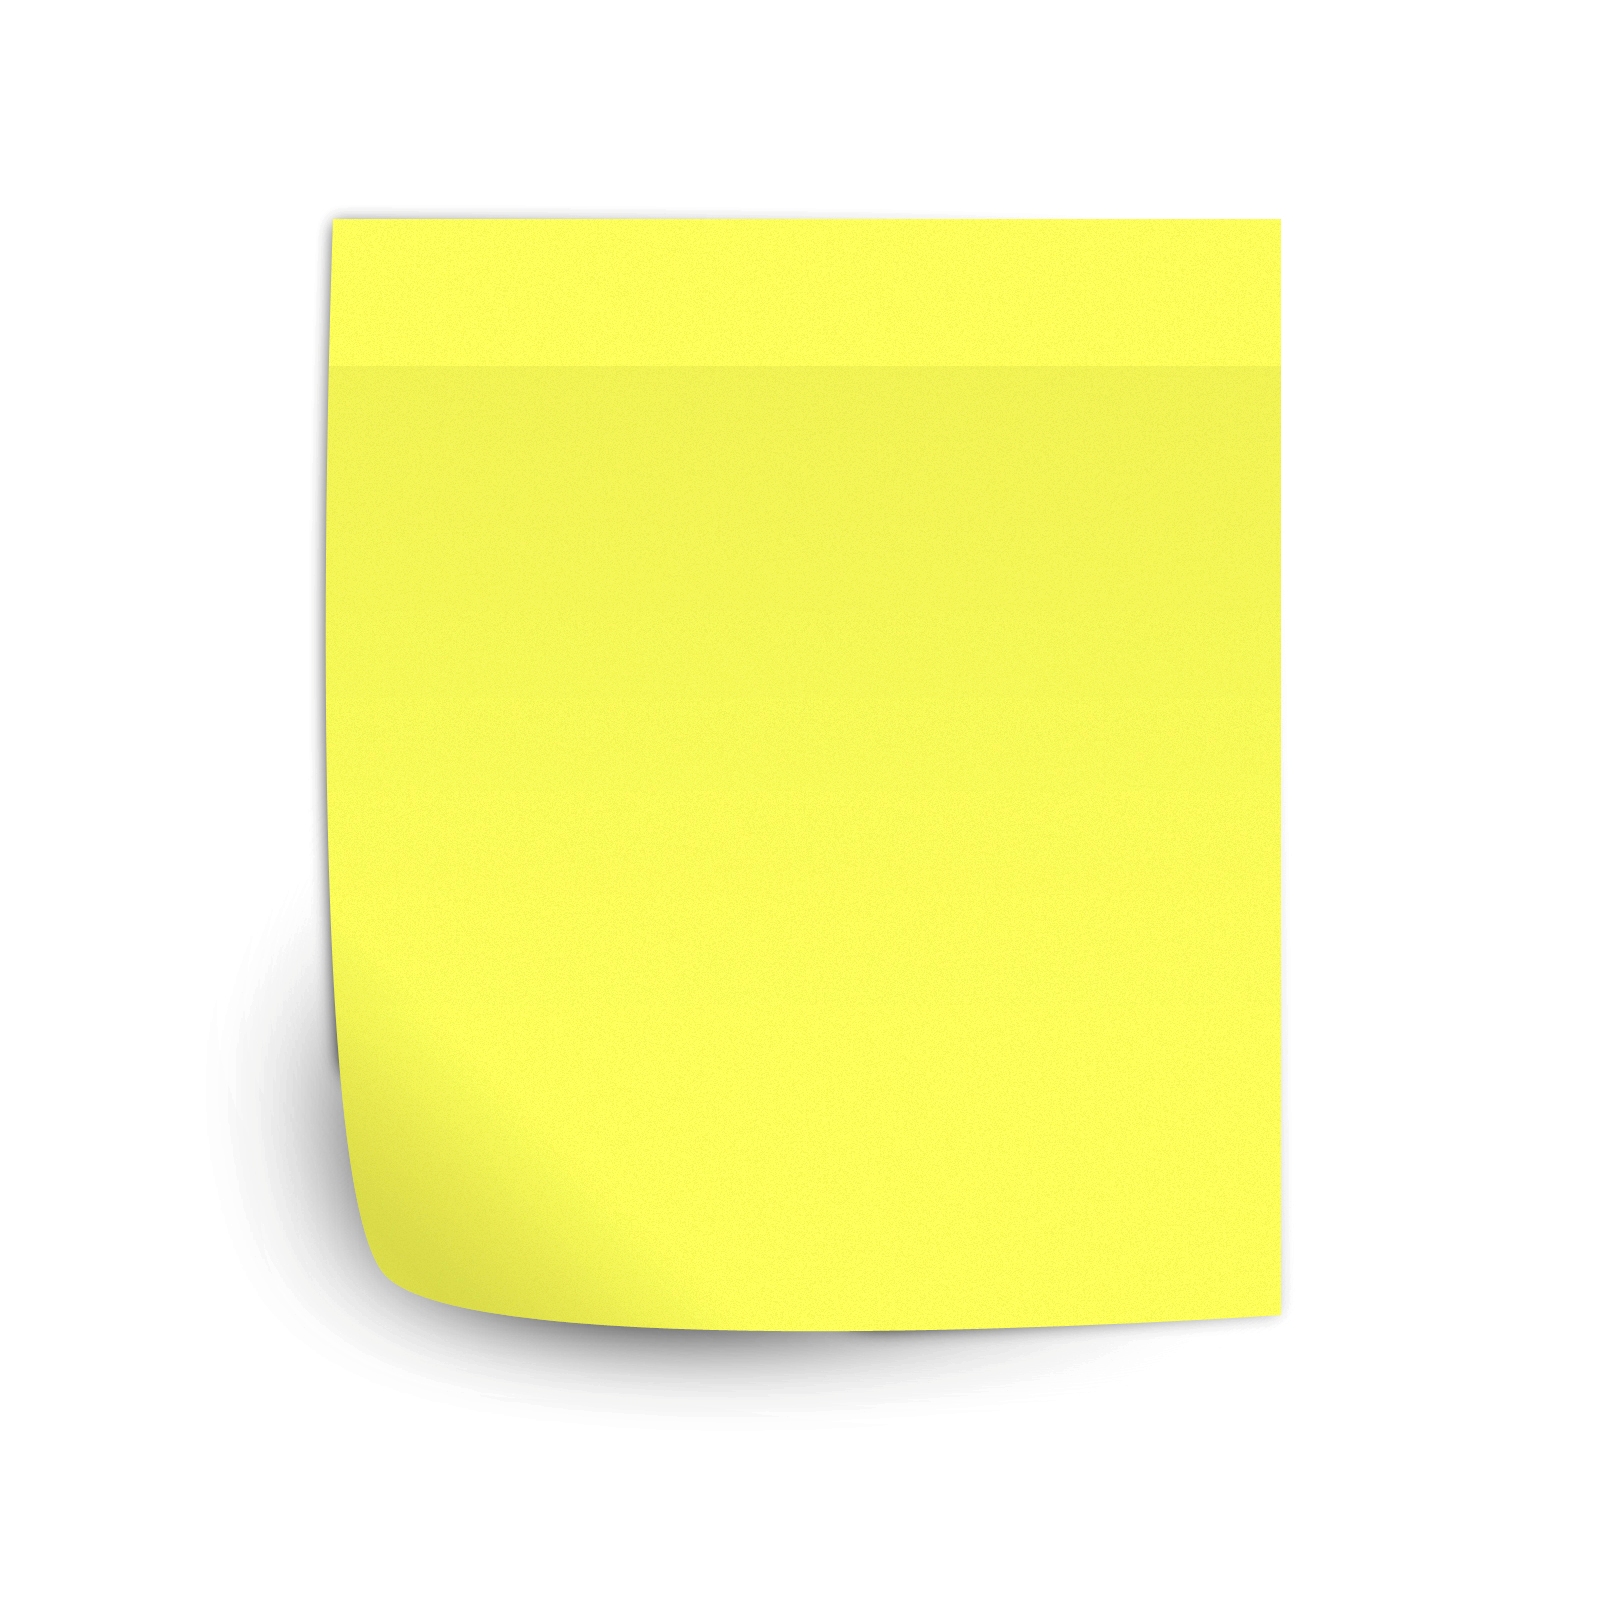 Sticky Notes Yellow Wallpaper Wallpaper ForWallpapers.com